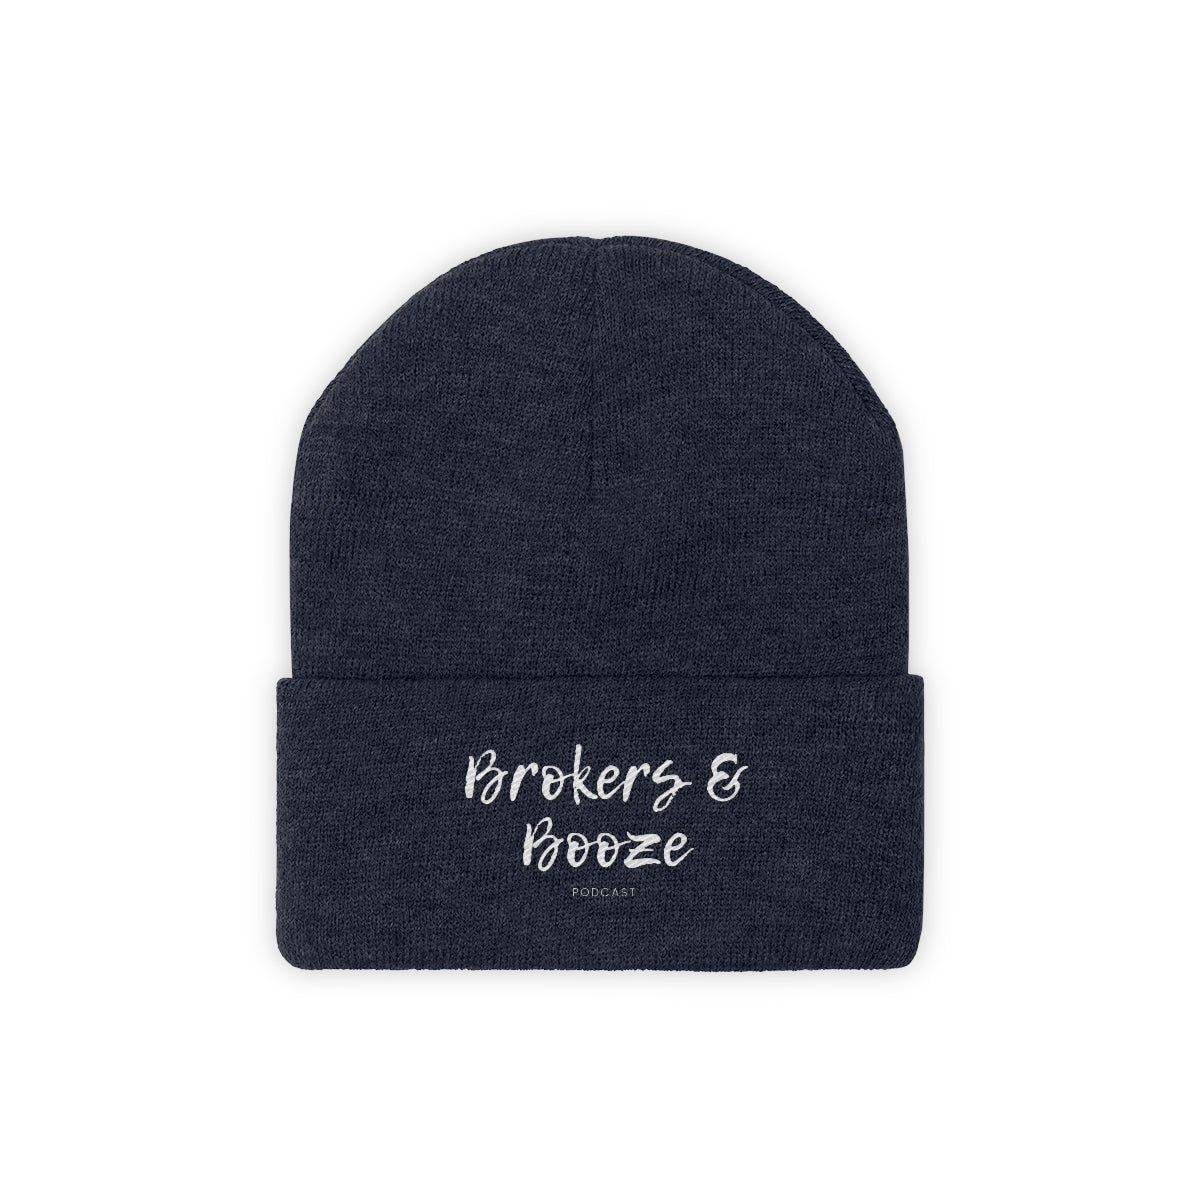 Brokers and Booze Podcast Knit Beanie